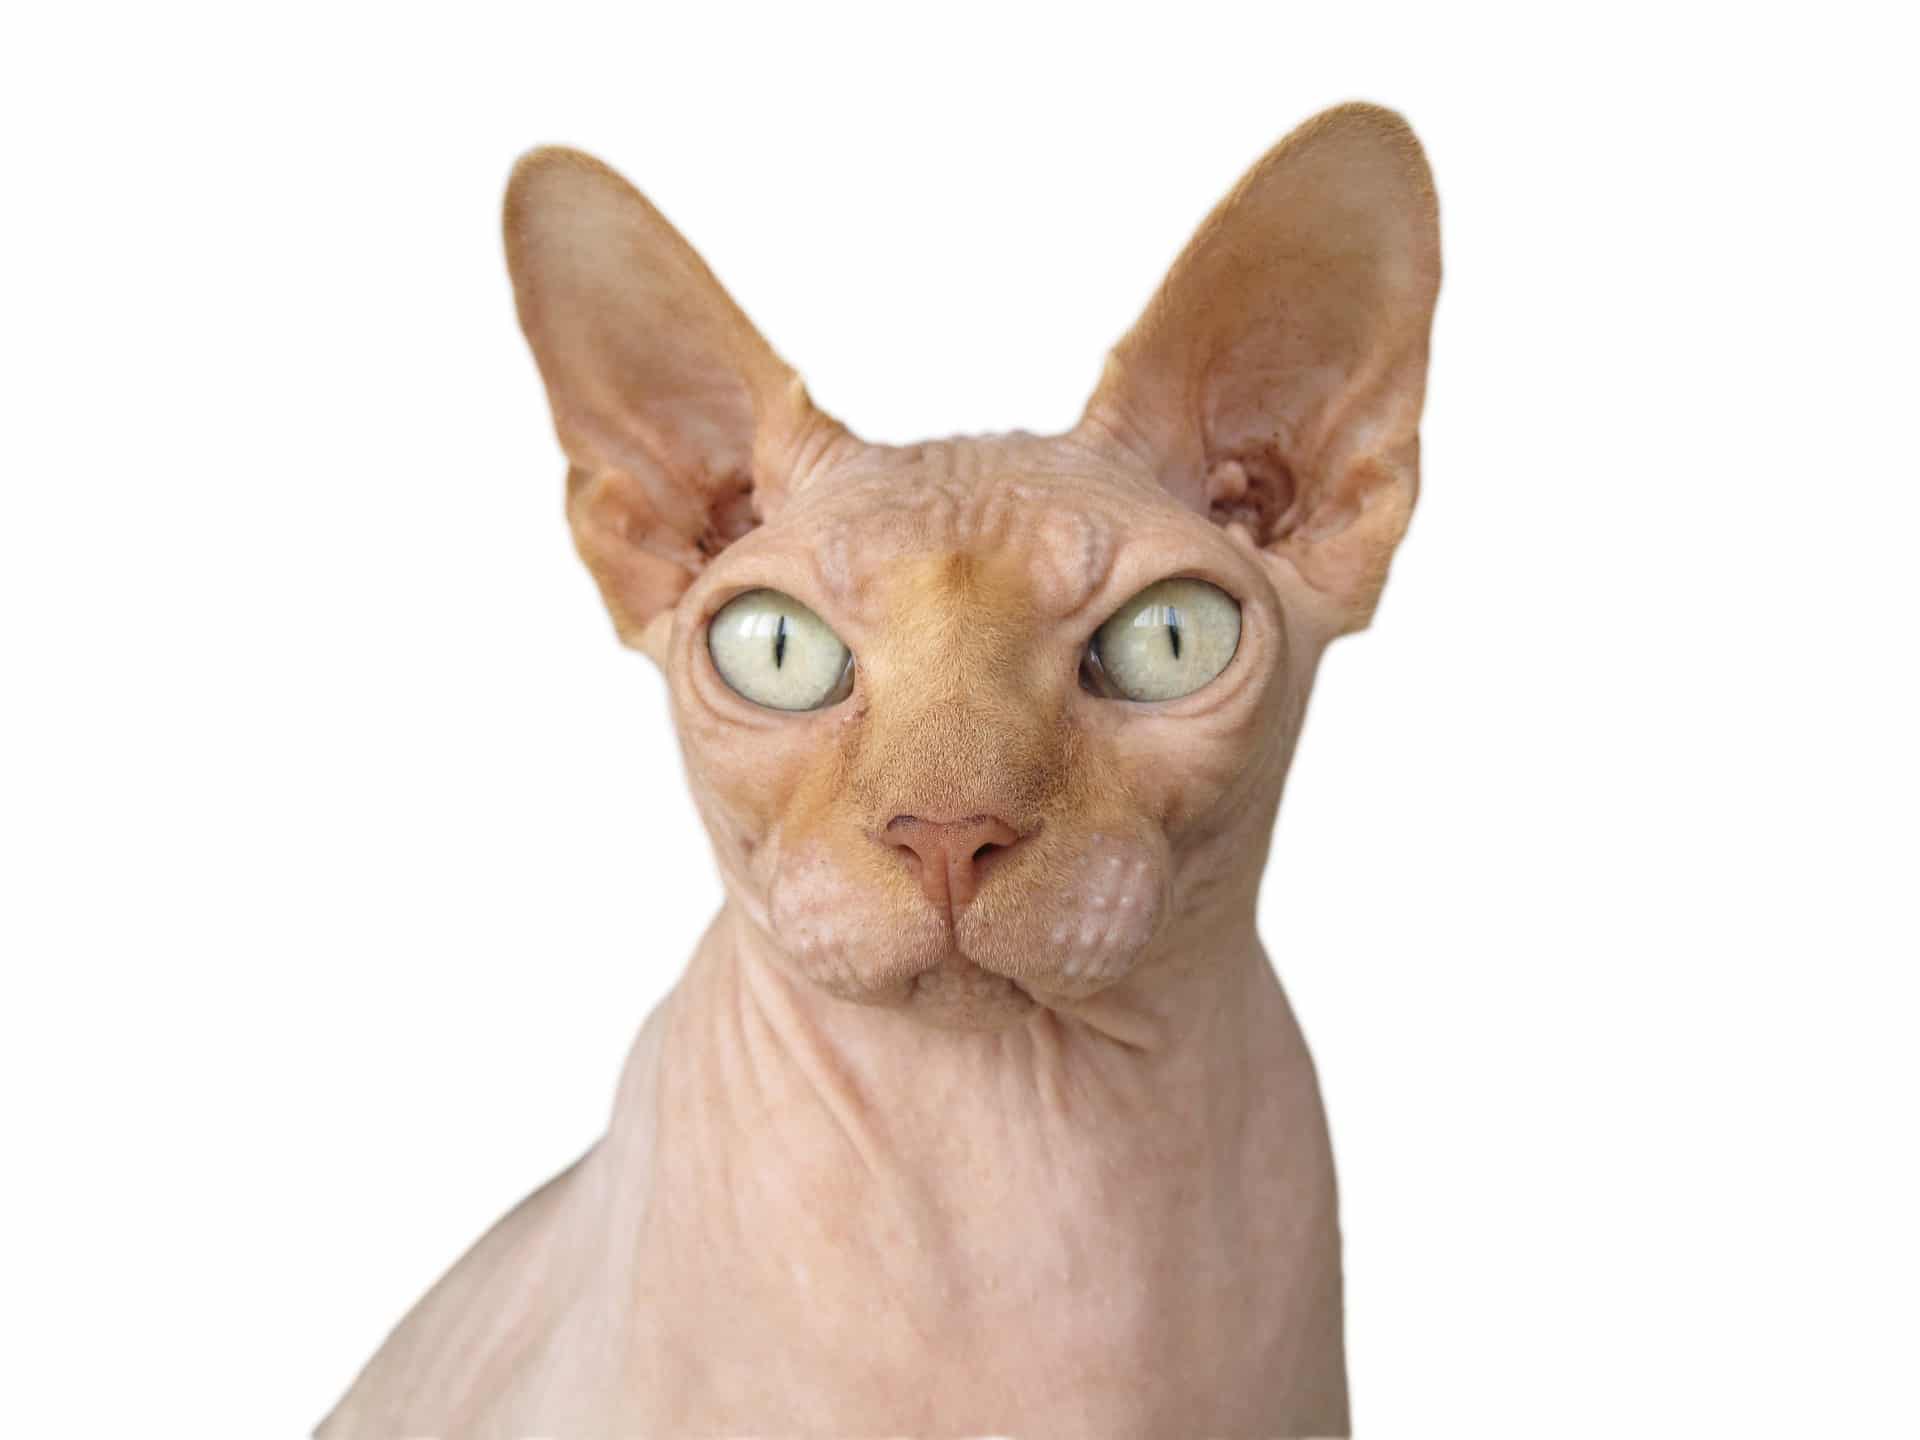 6 Hairless Cat Breeds You Need to Know About (Because They're Great)